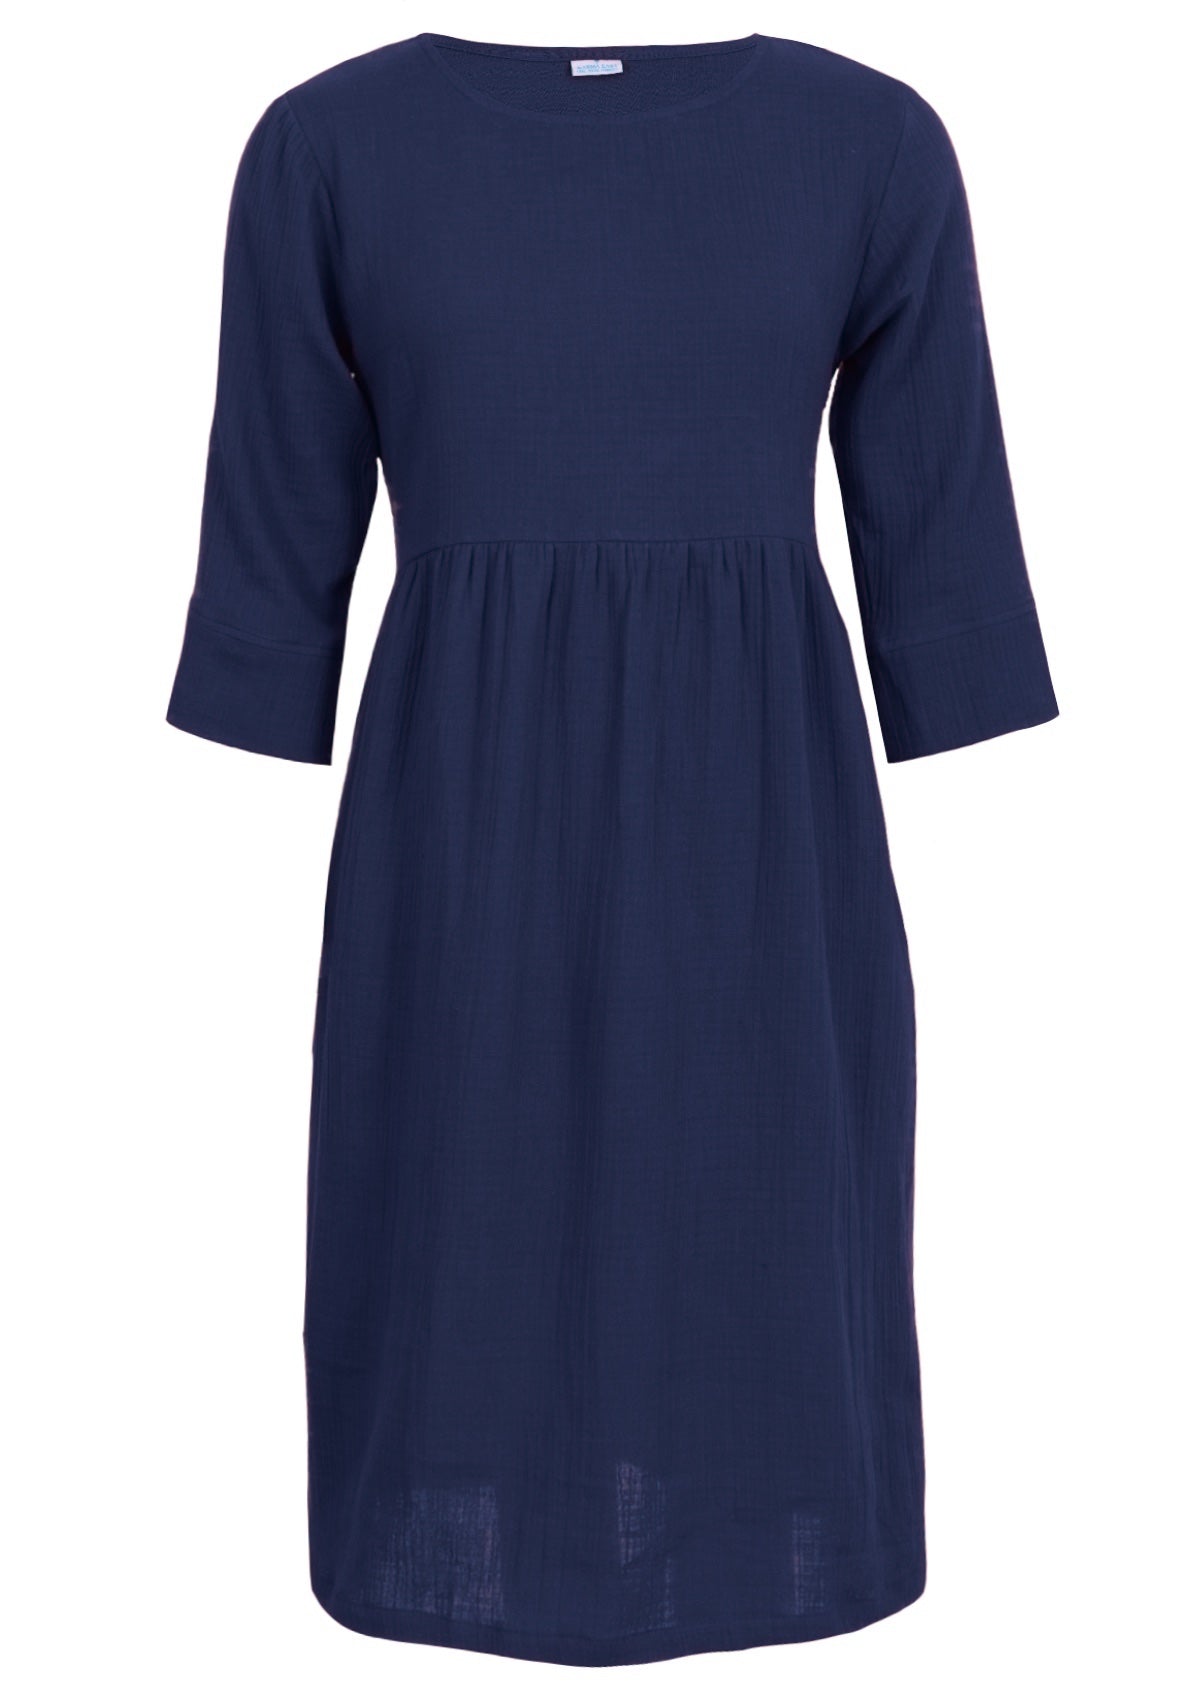 Two layers of lightweight cotton gauze make up this relaxed fit dress